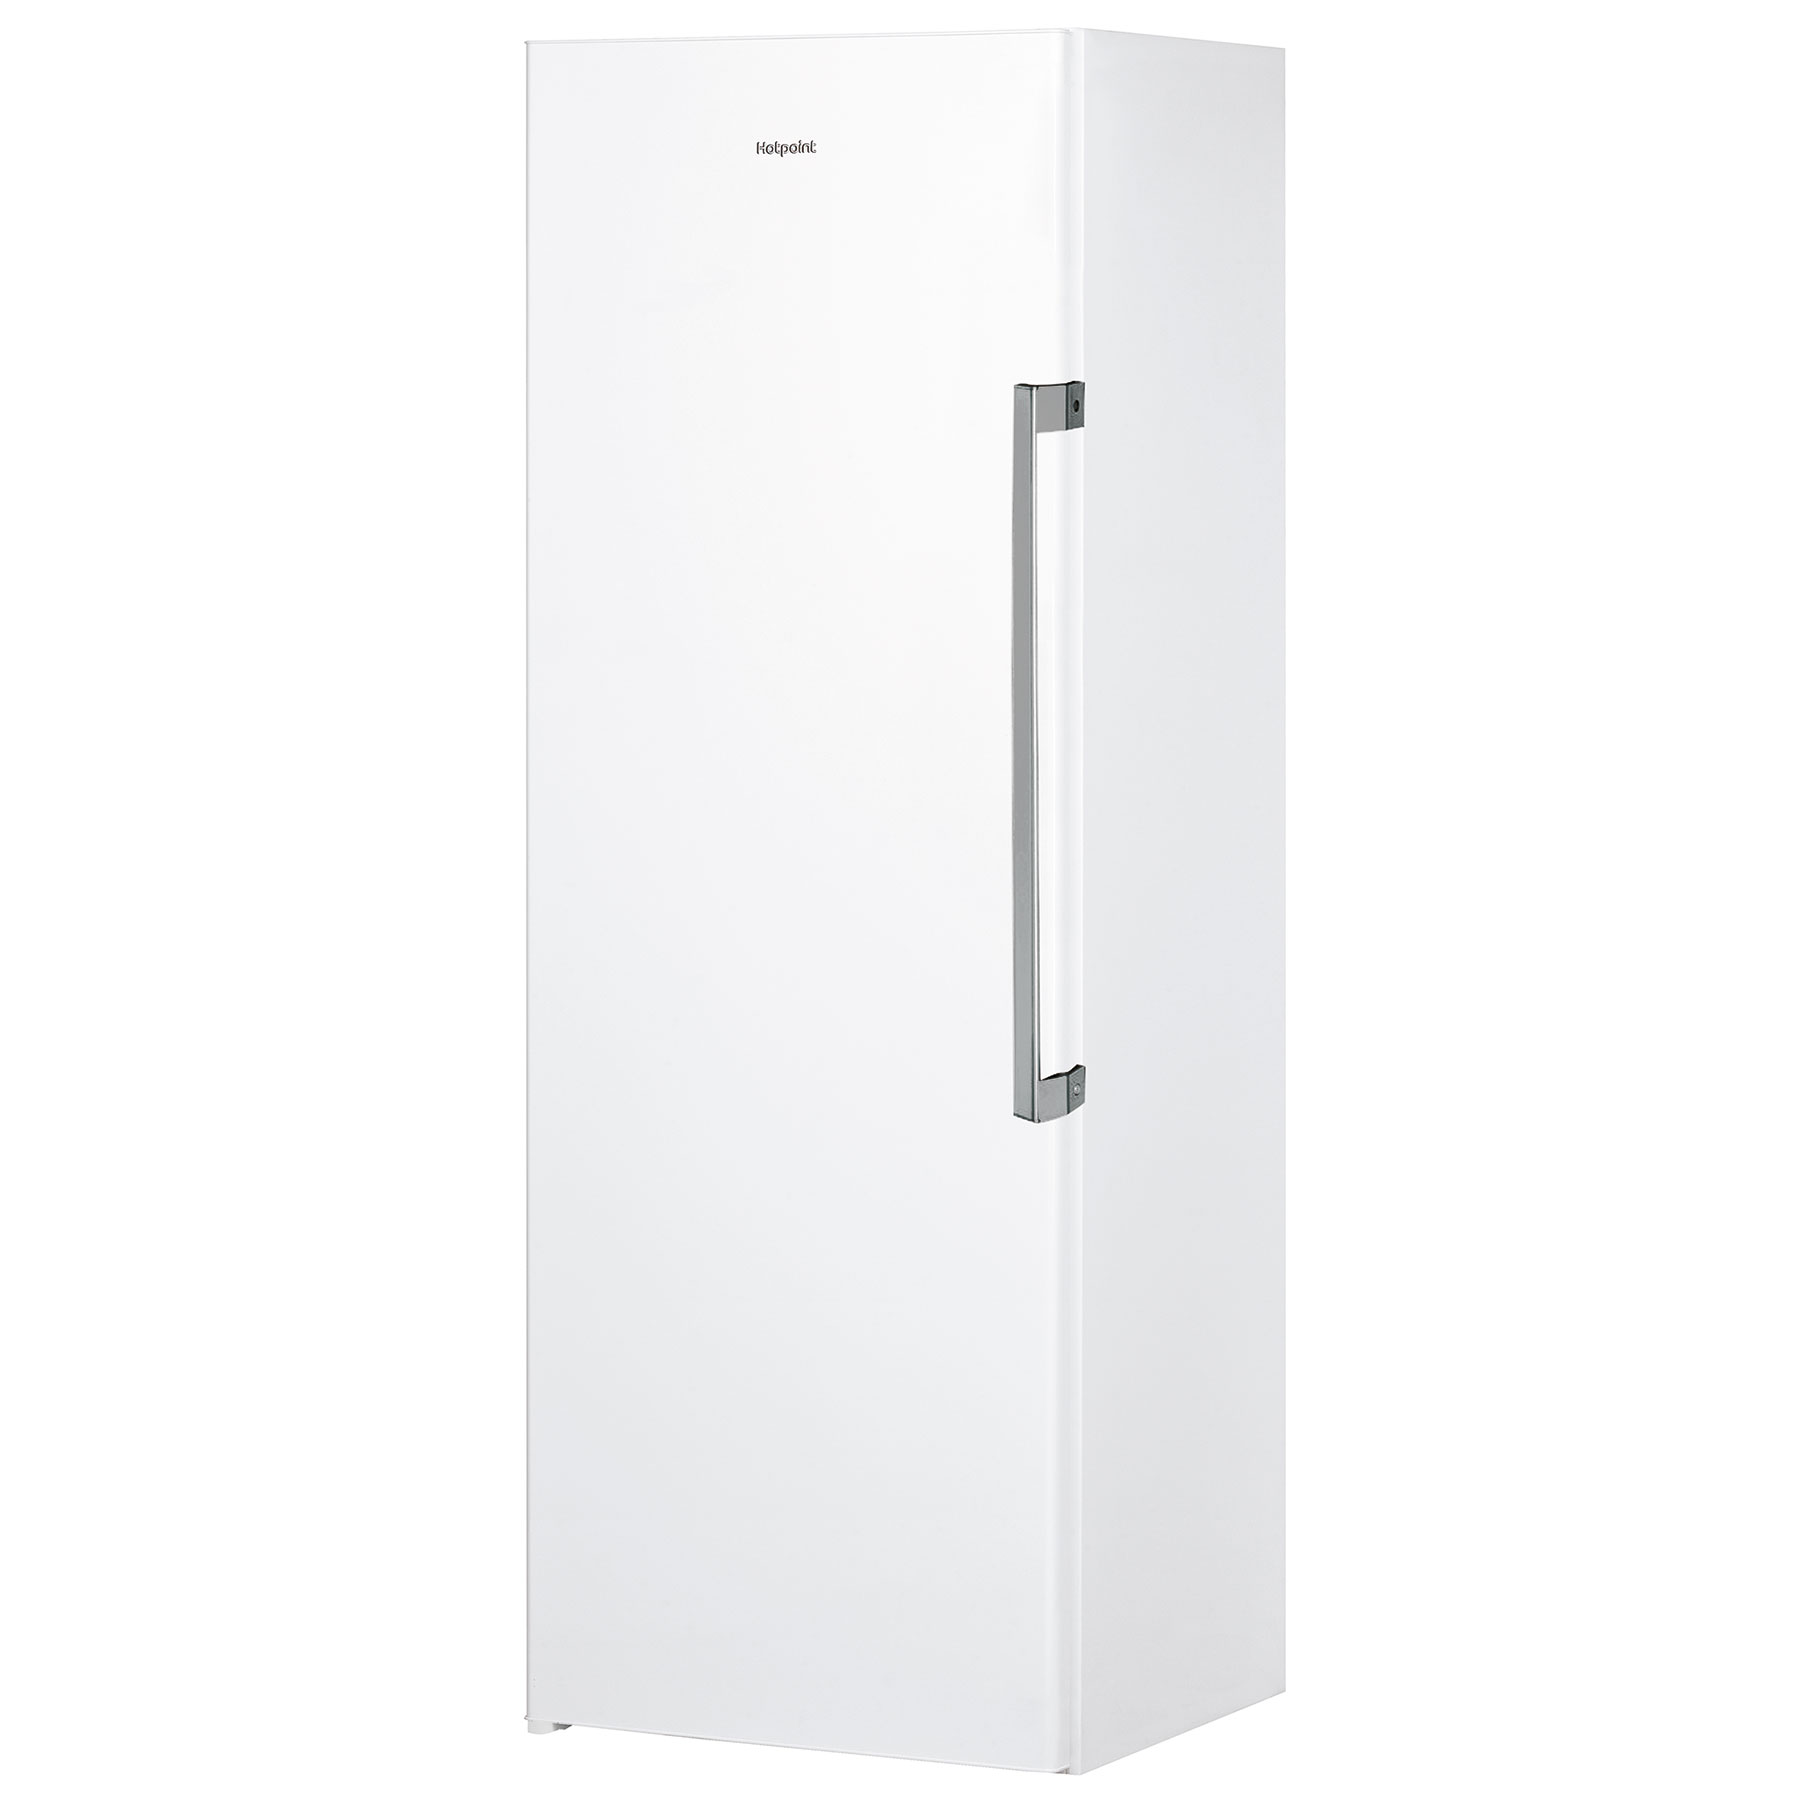 Image of Hotpoint UH6F2CW 60cm Tall Frost Free Freezer in White 1 67m E Rated